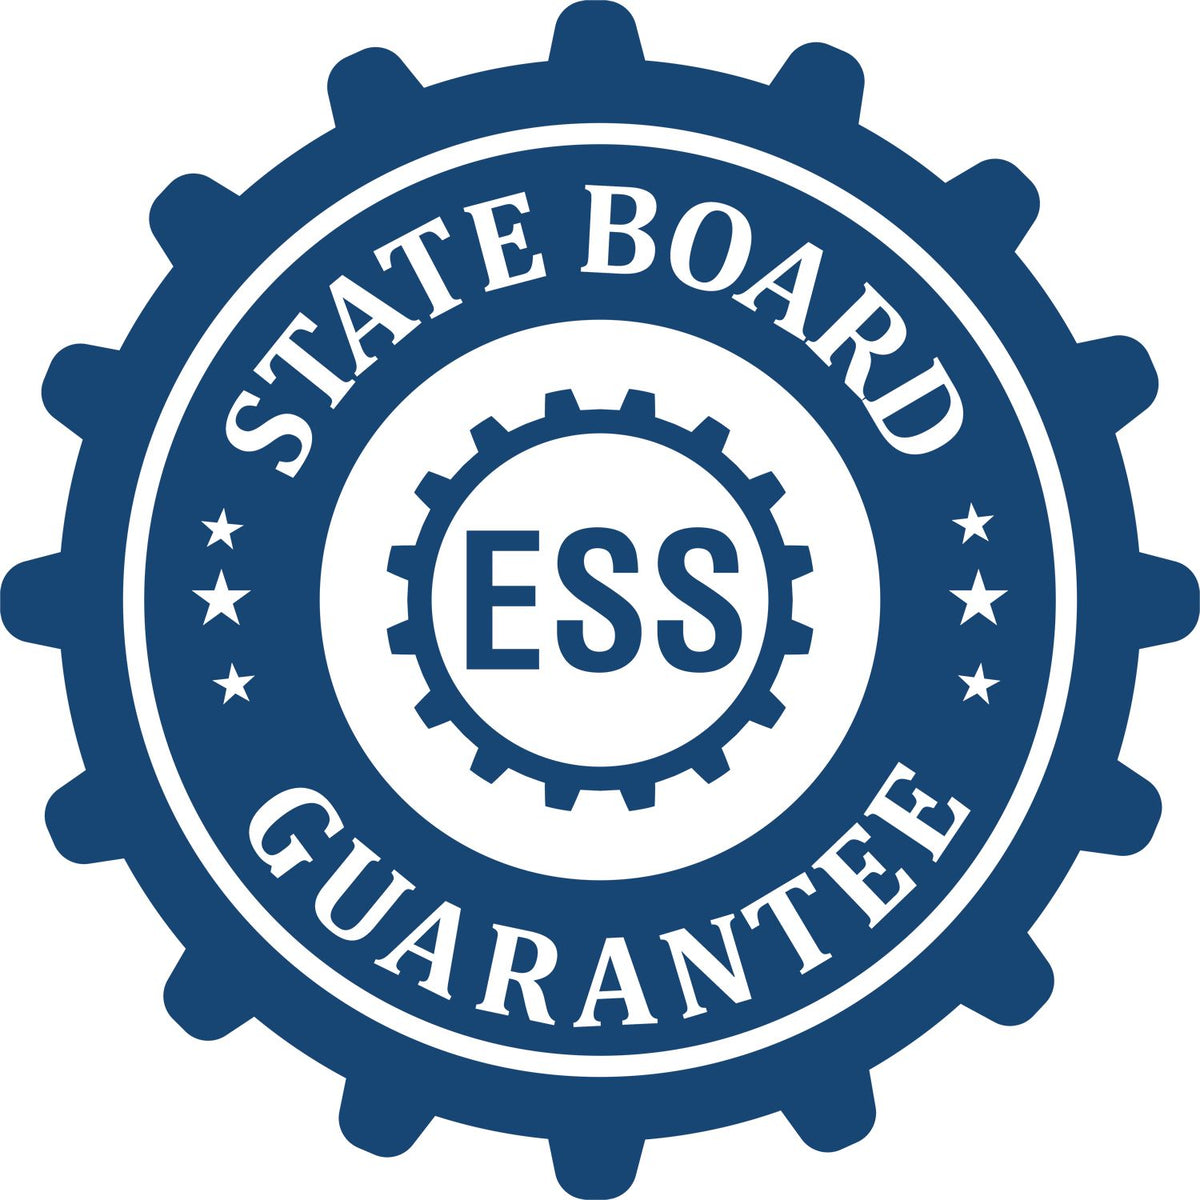 An emblem in a gear shape illustrating a state board guarantee for the Hybrid Mississippi Geologist Seal